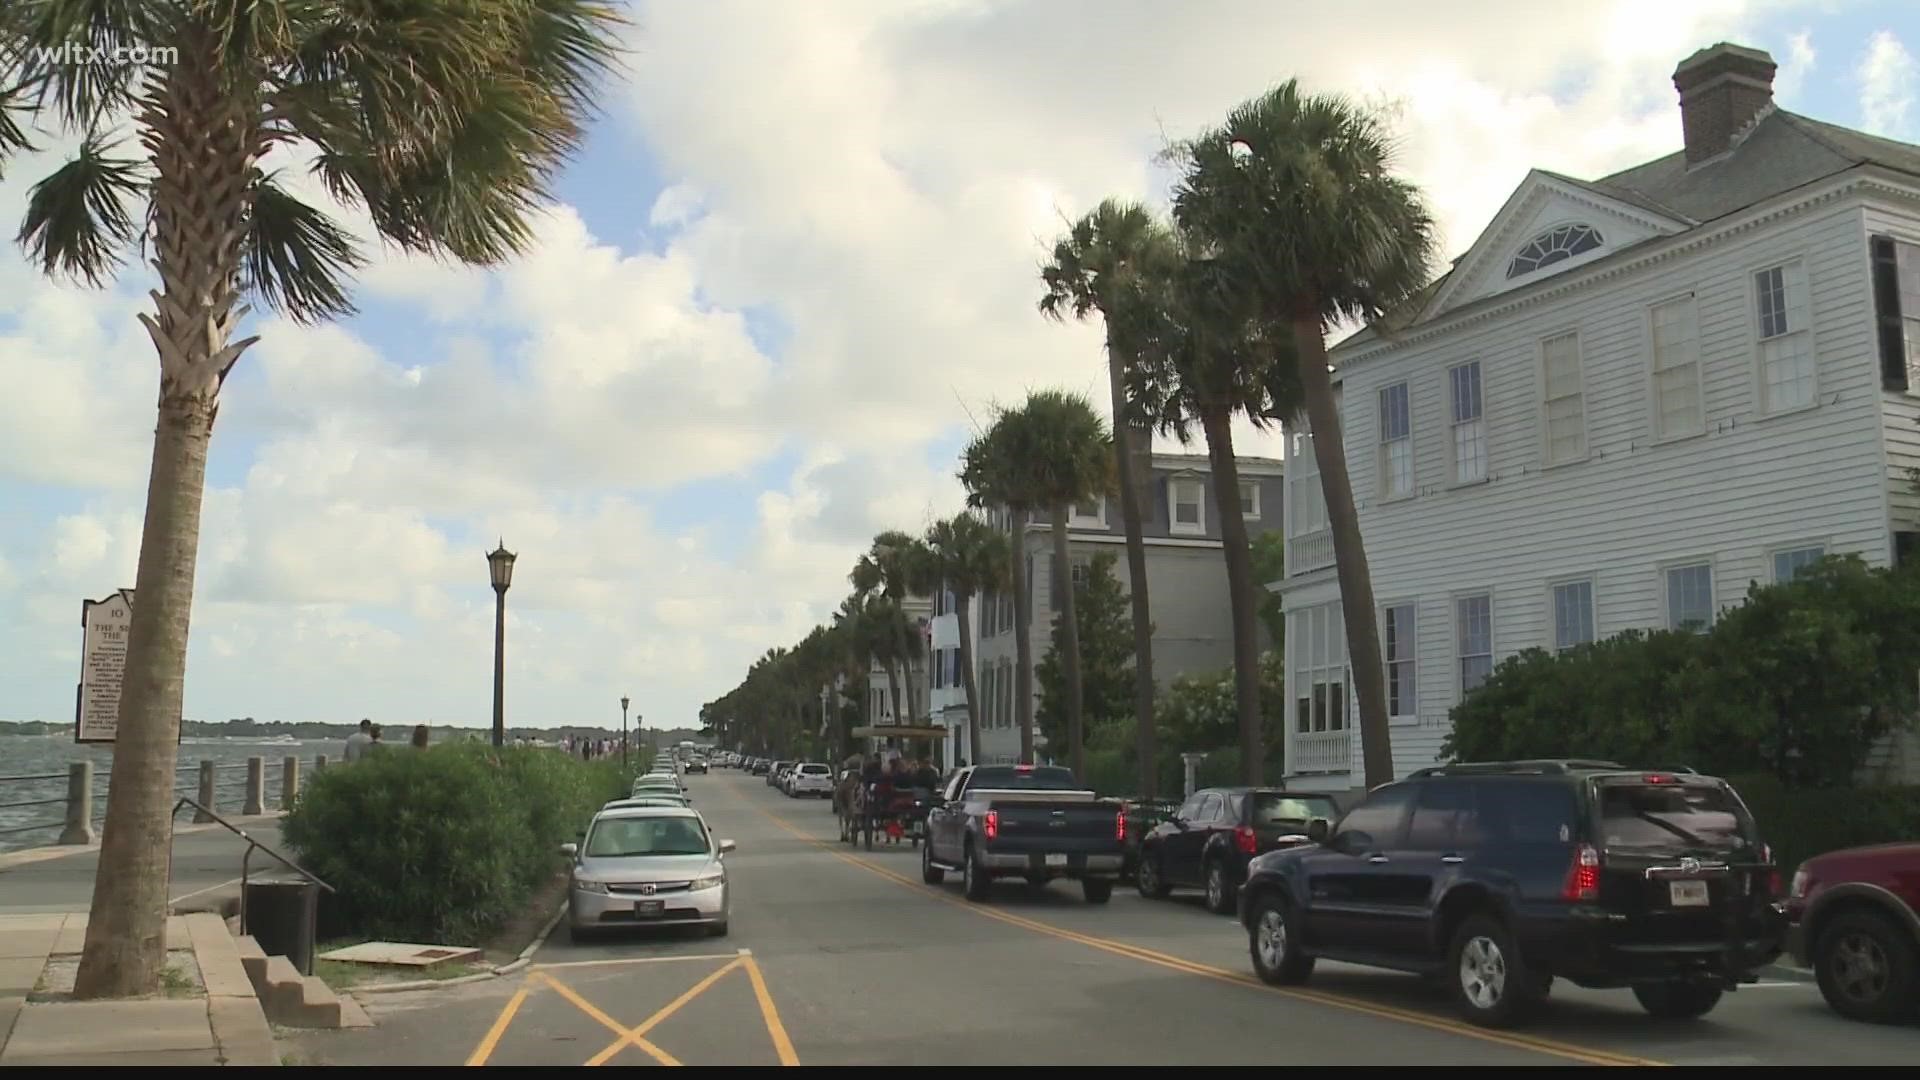 The Palmetto State is experiencing warmer weather and here's why.